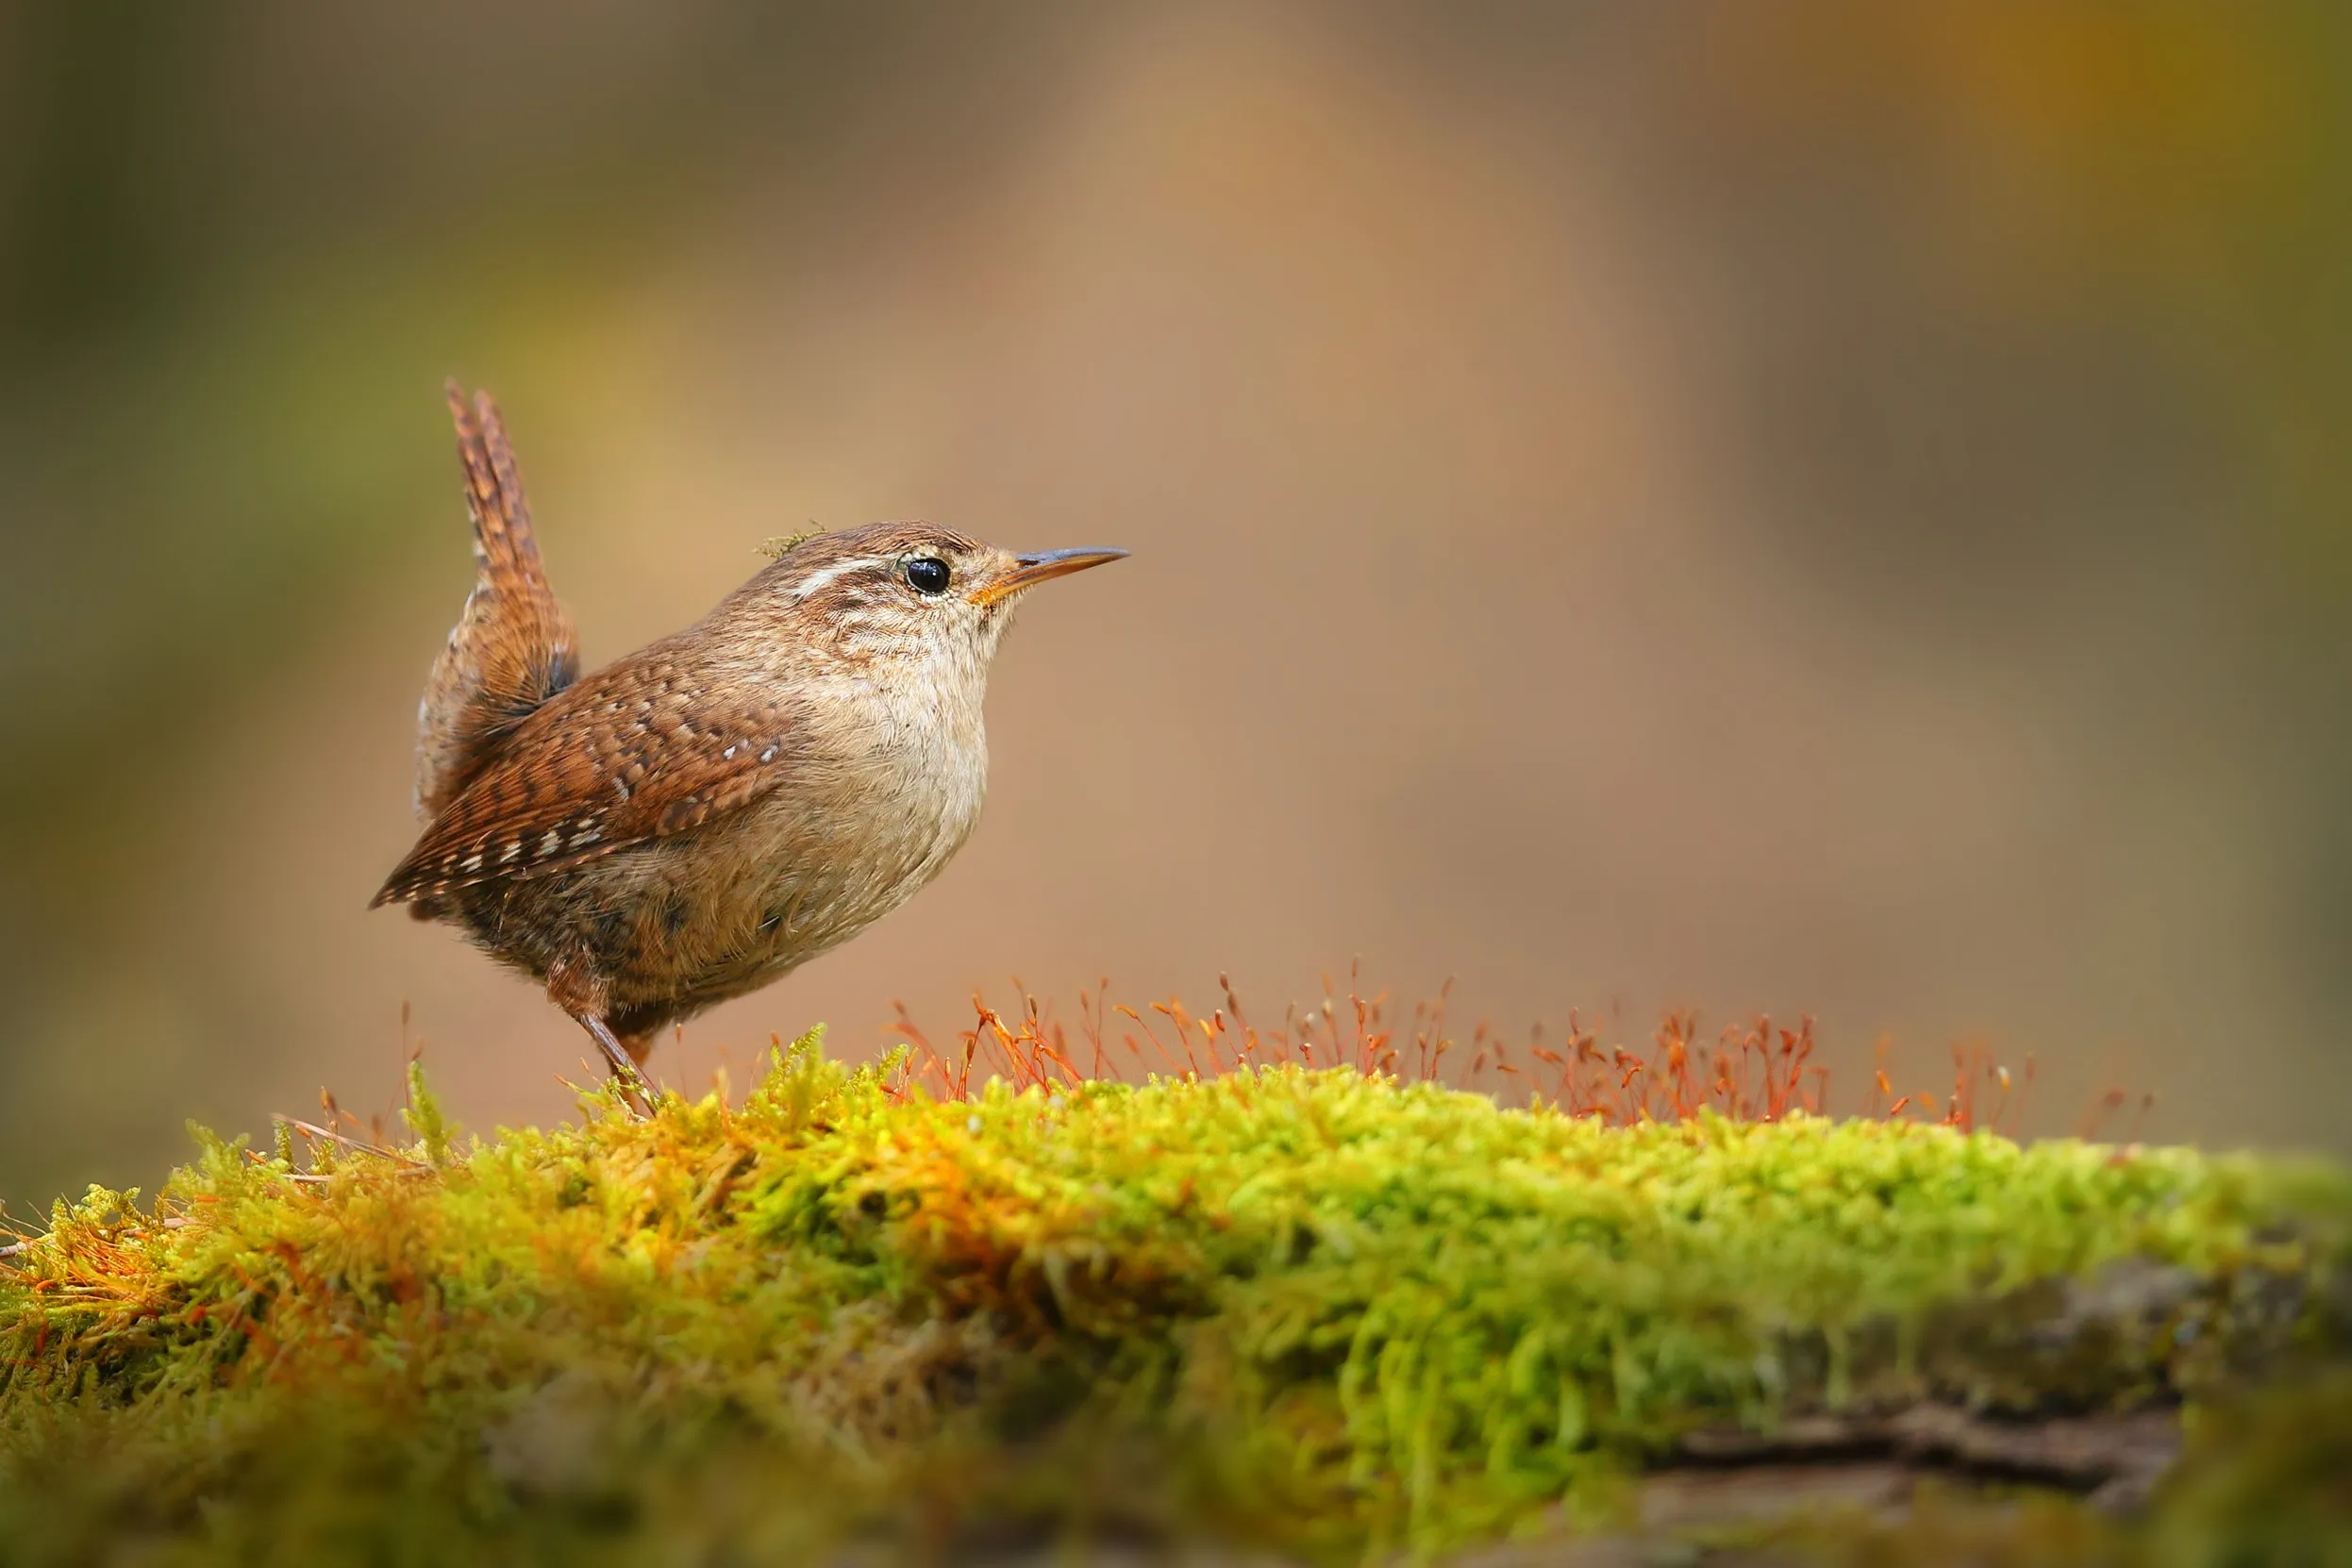 A lone Wren stood on a log covered in green, yellow and red moss.